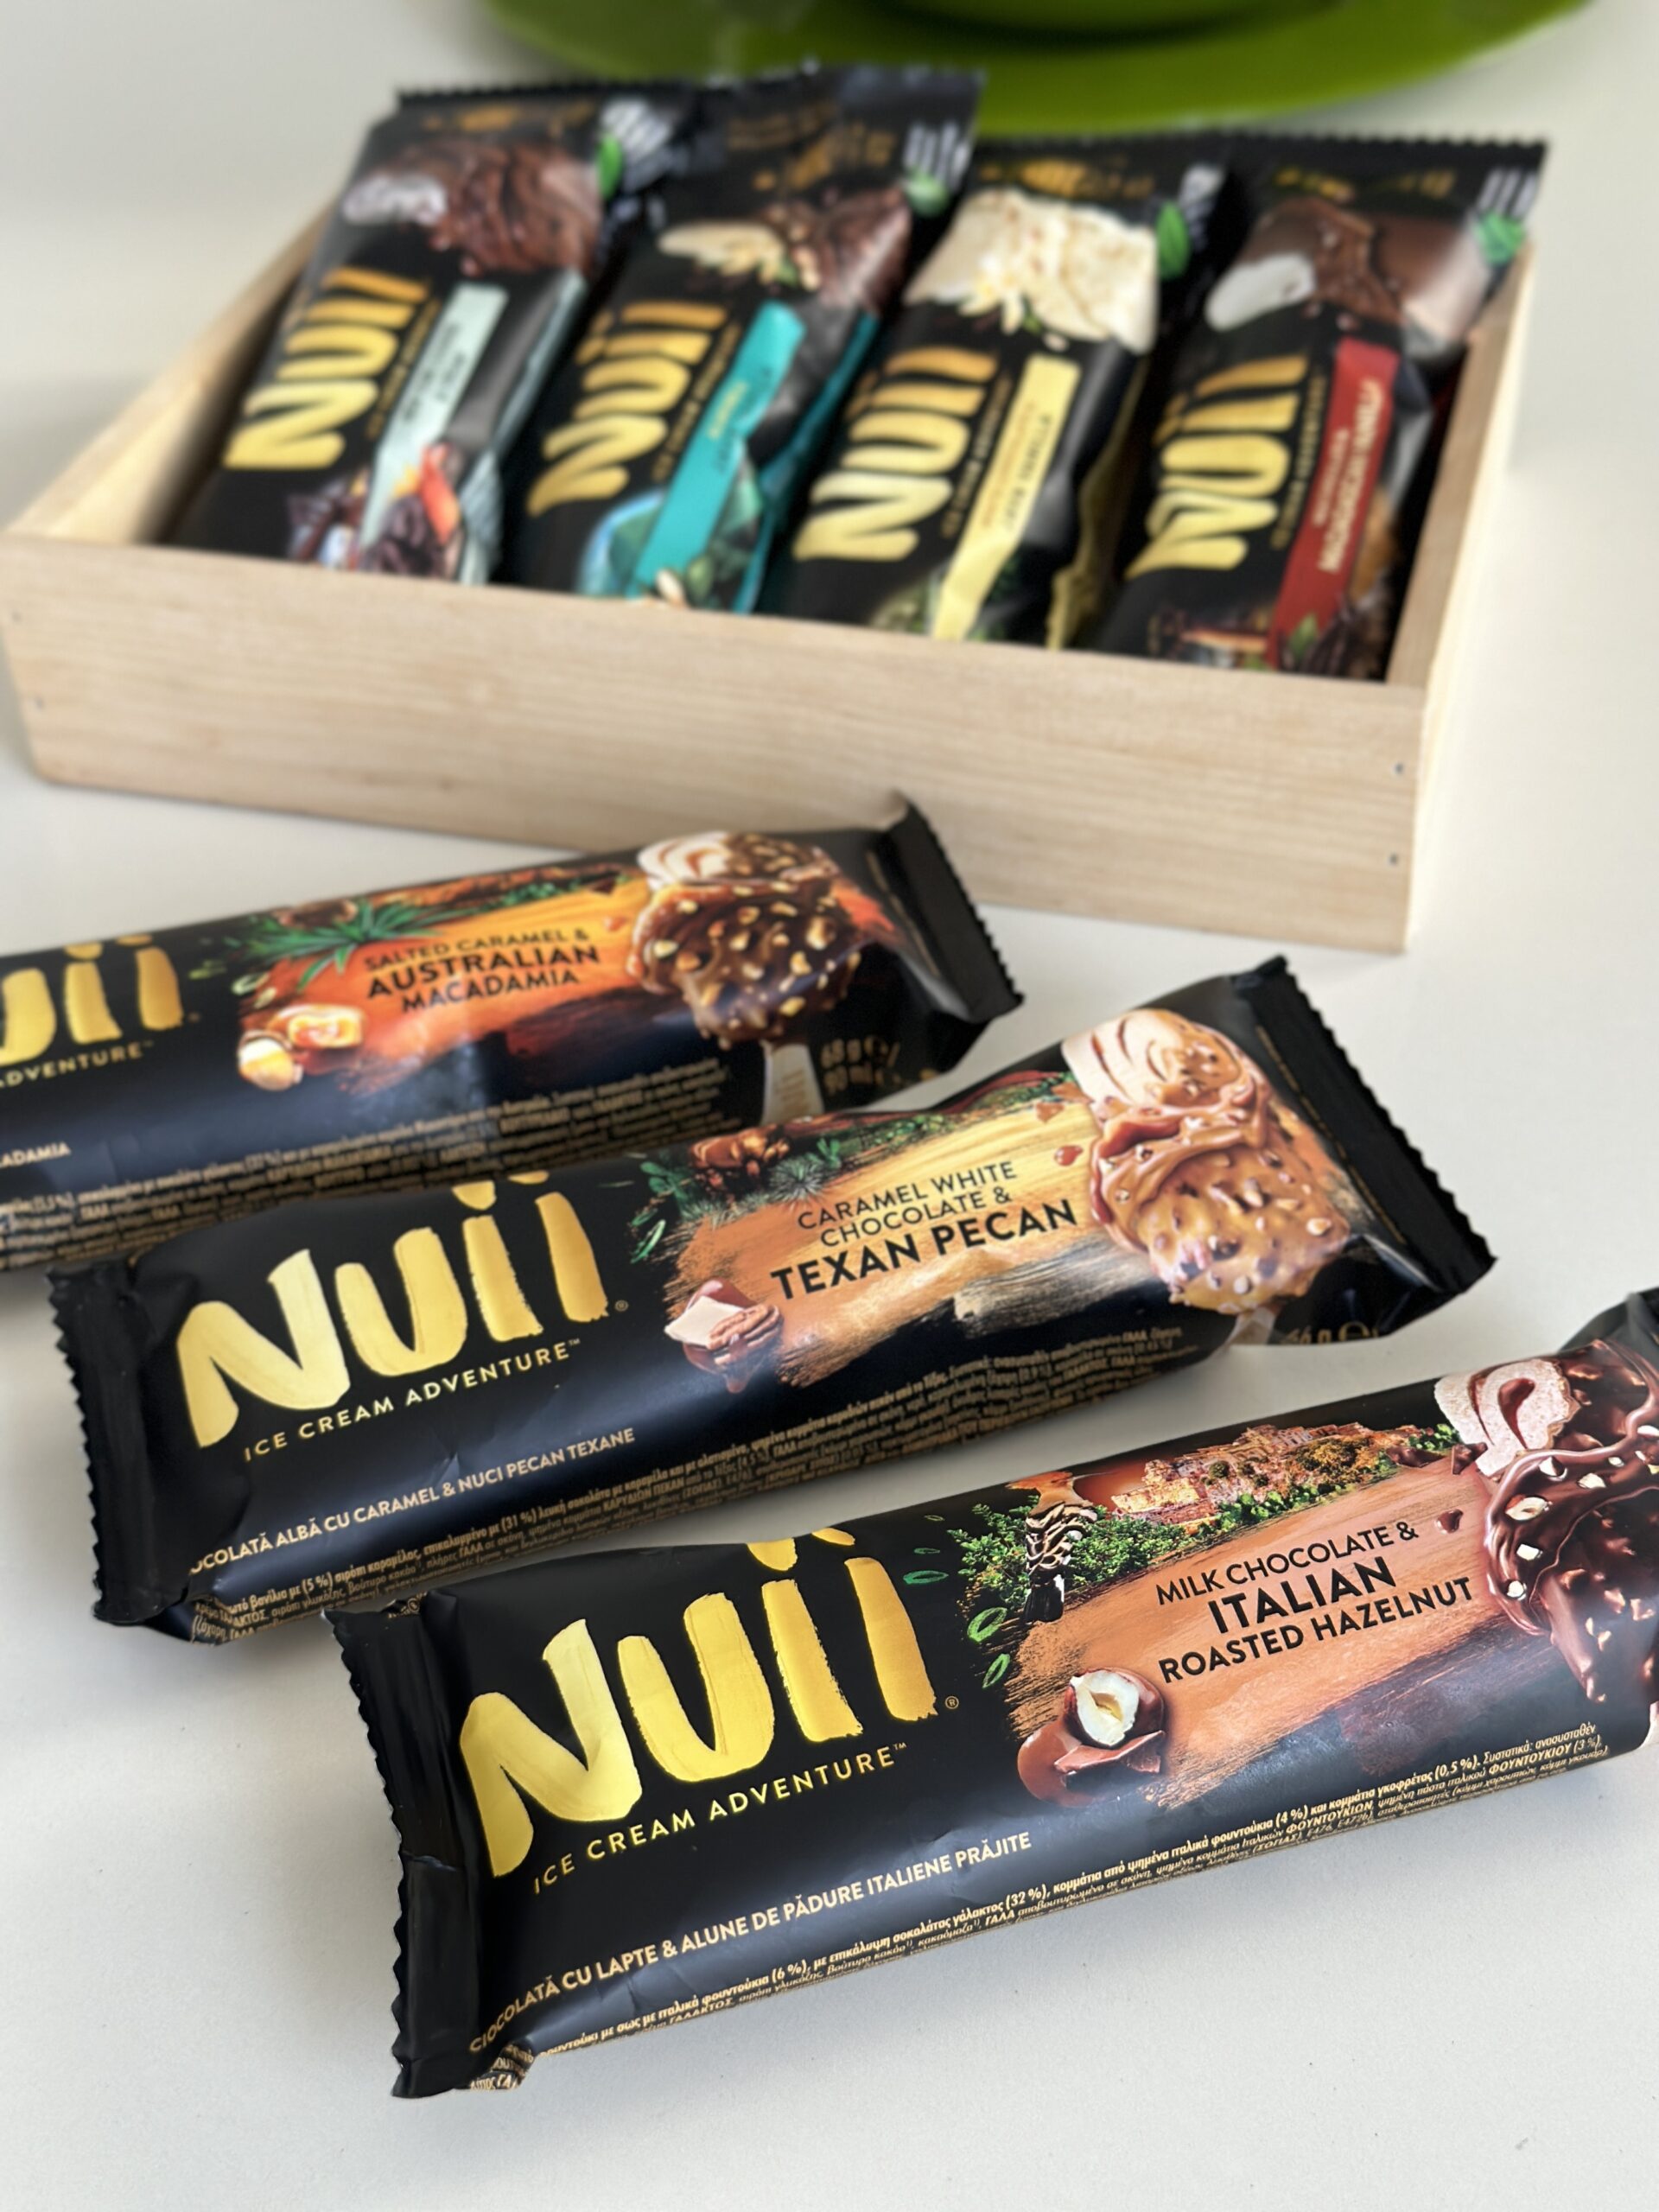 NUII is back with 2 New Flavours for Cyprus